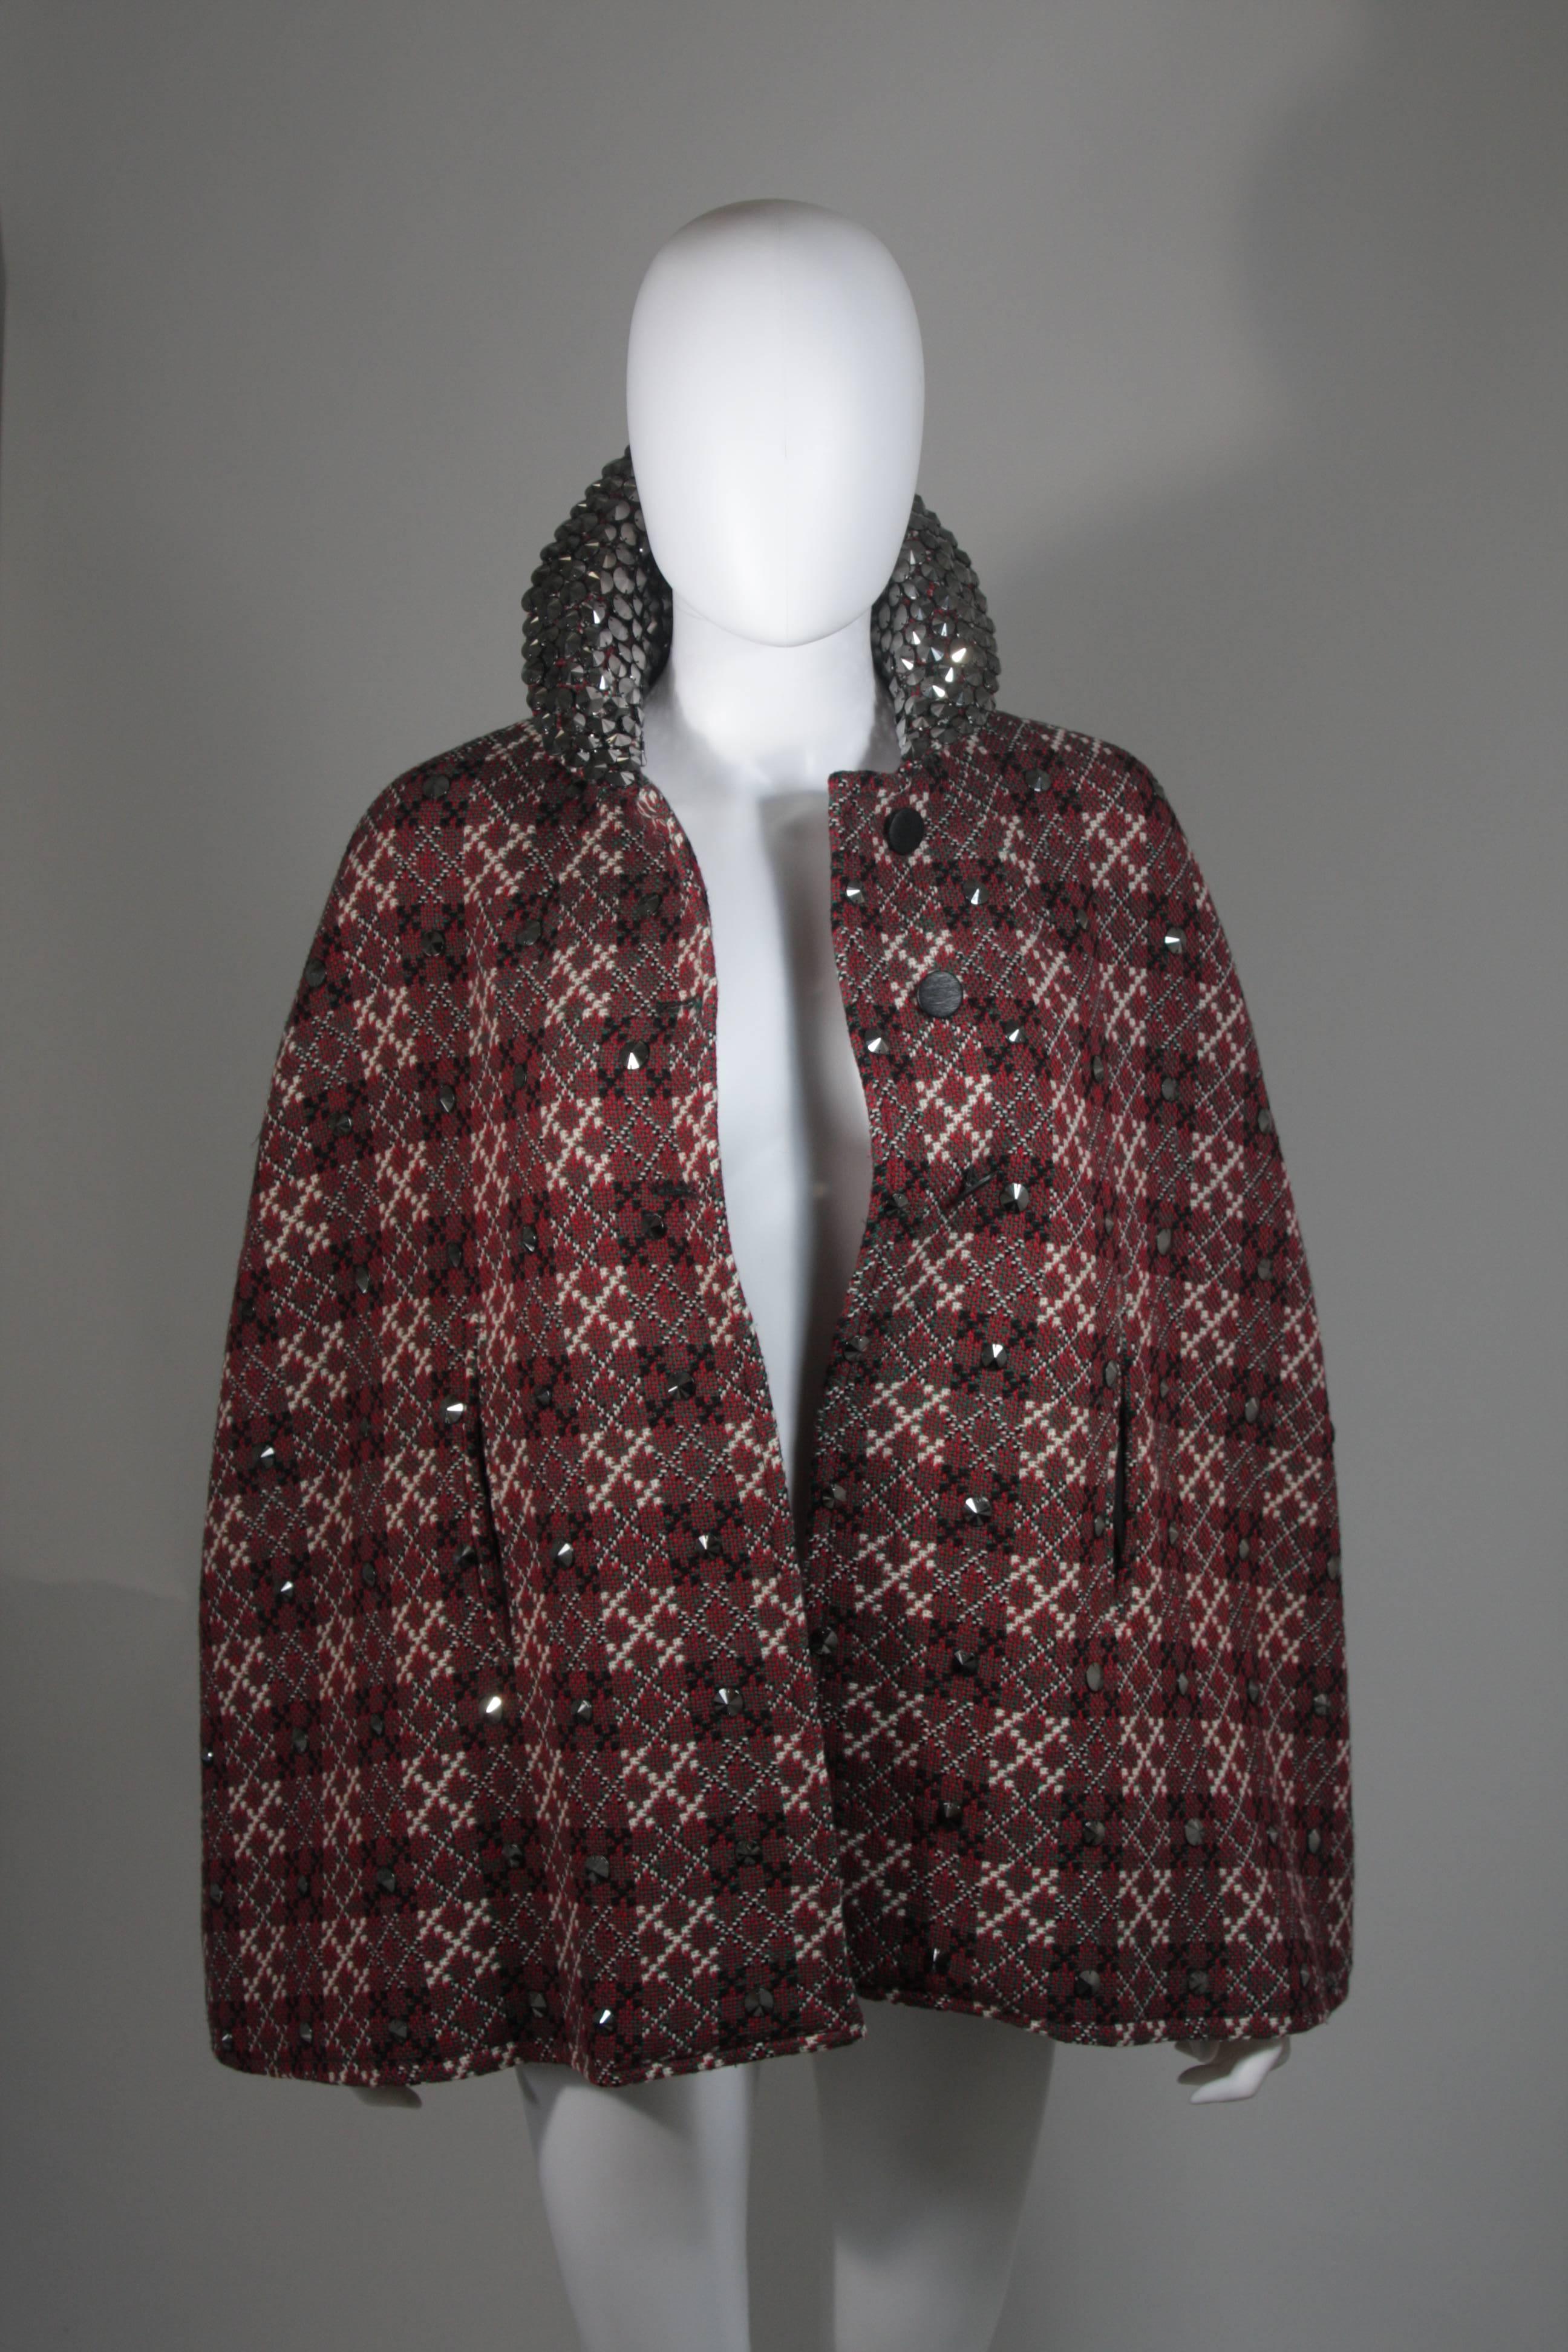 Vintage Red Green & Cream Plaid Wool Cape with Gunmetal Stud Applique 1